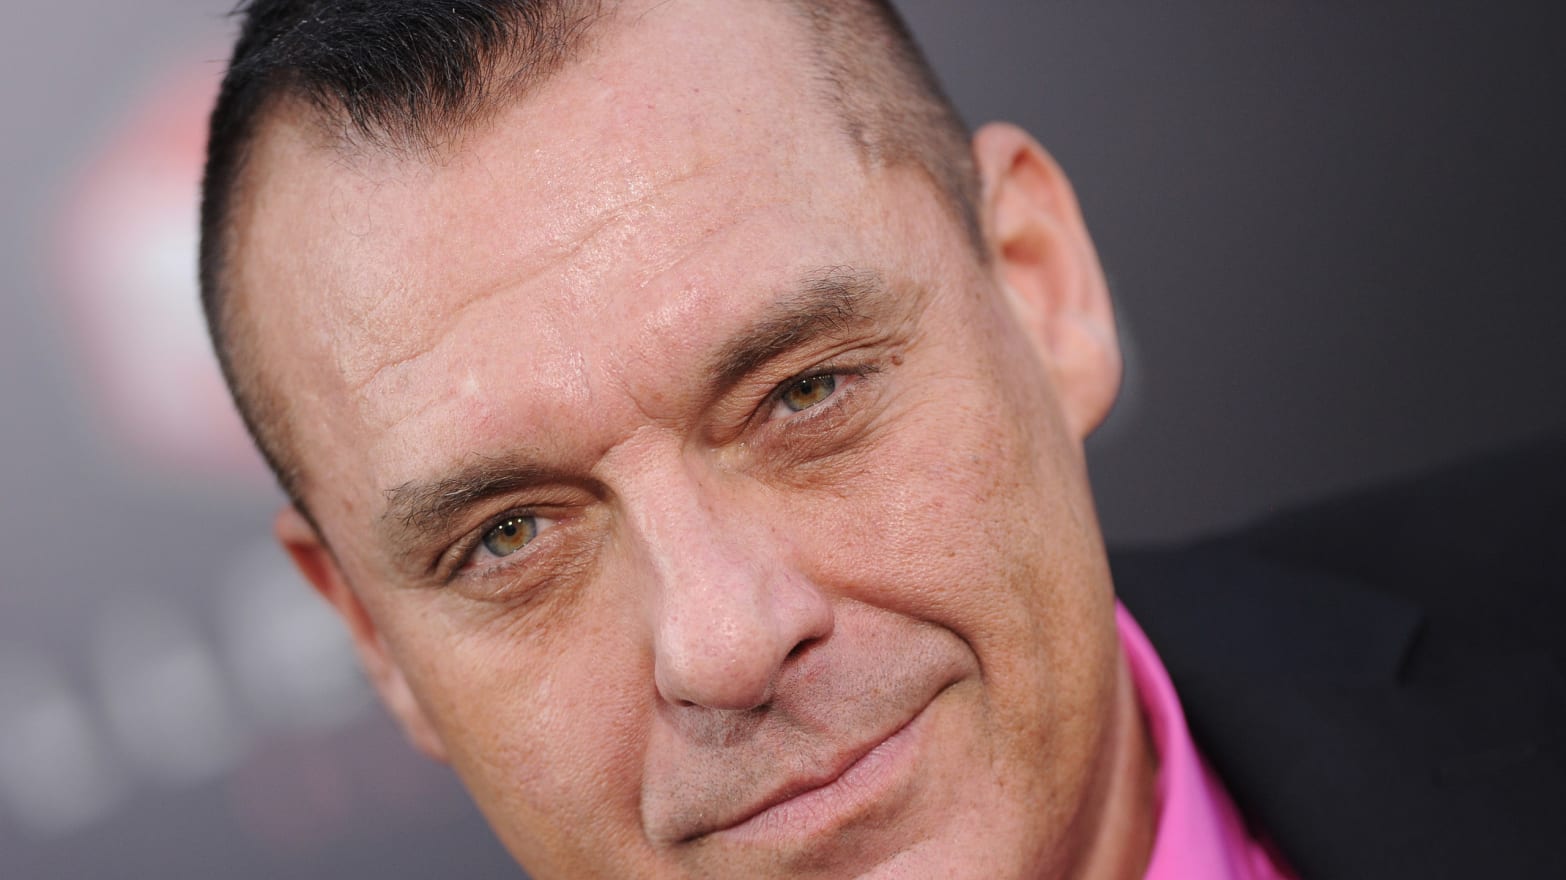 Tom Sizemores Revenge On Tom Cruises Scientology Recruitment, Drugs, and Craving a Comeback photo